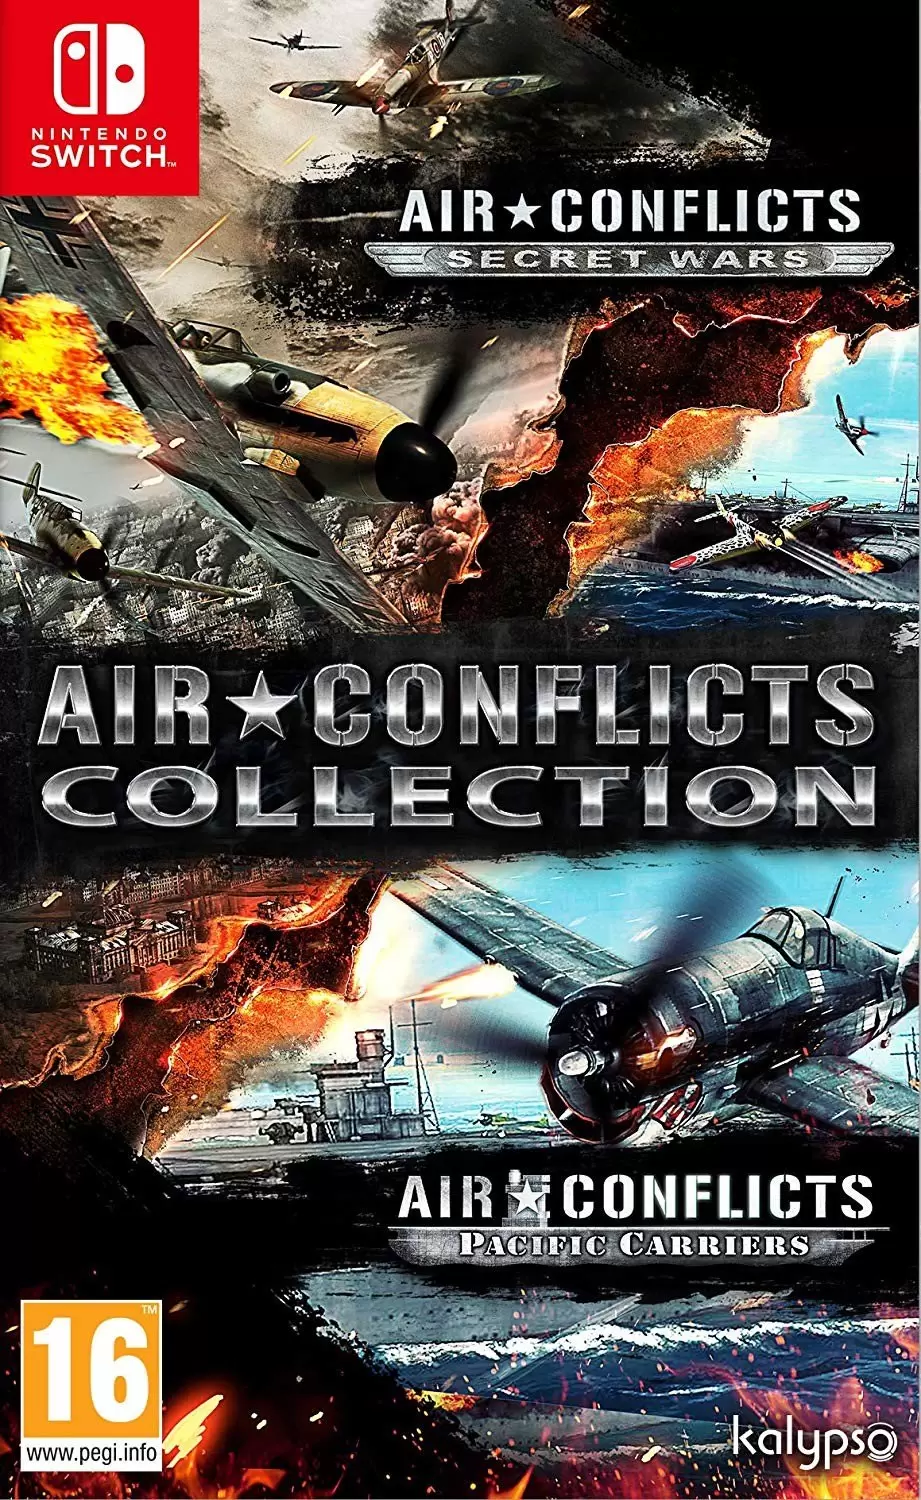 Nintendo Switch Games - Air Conflicts Collection